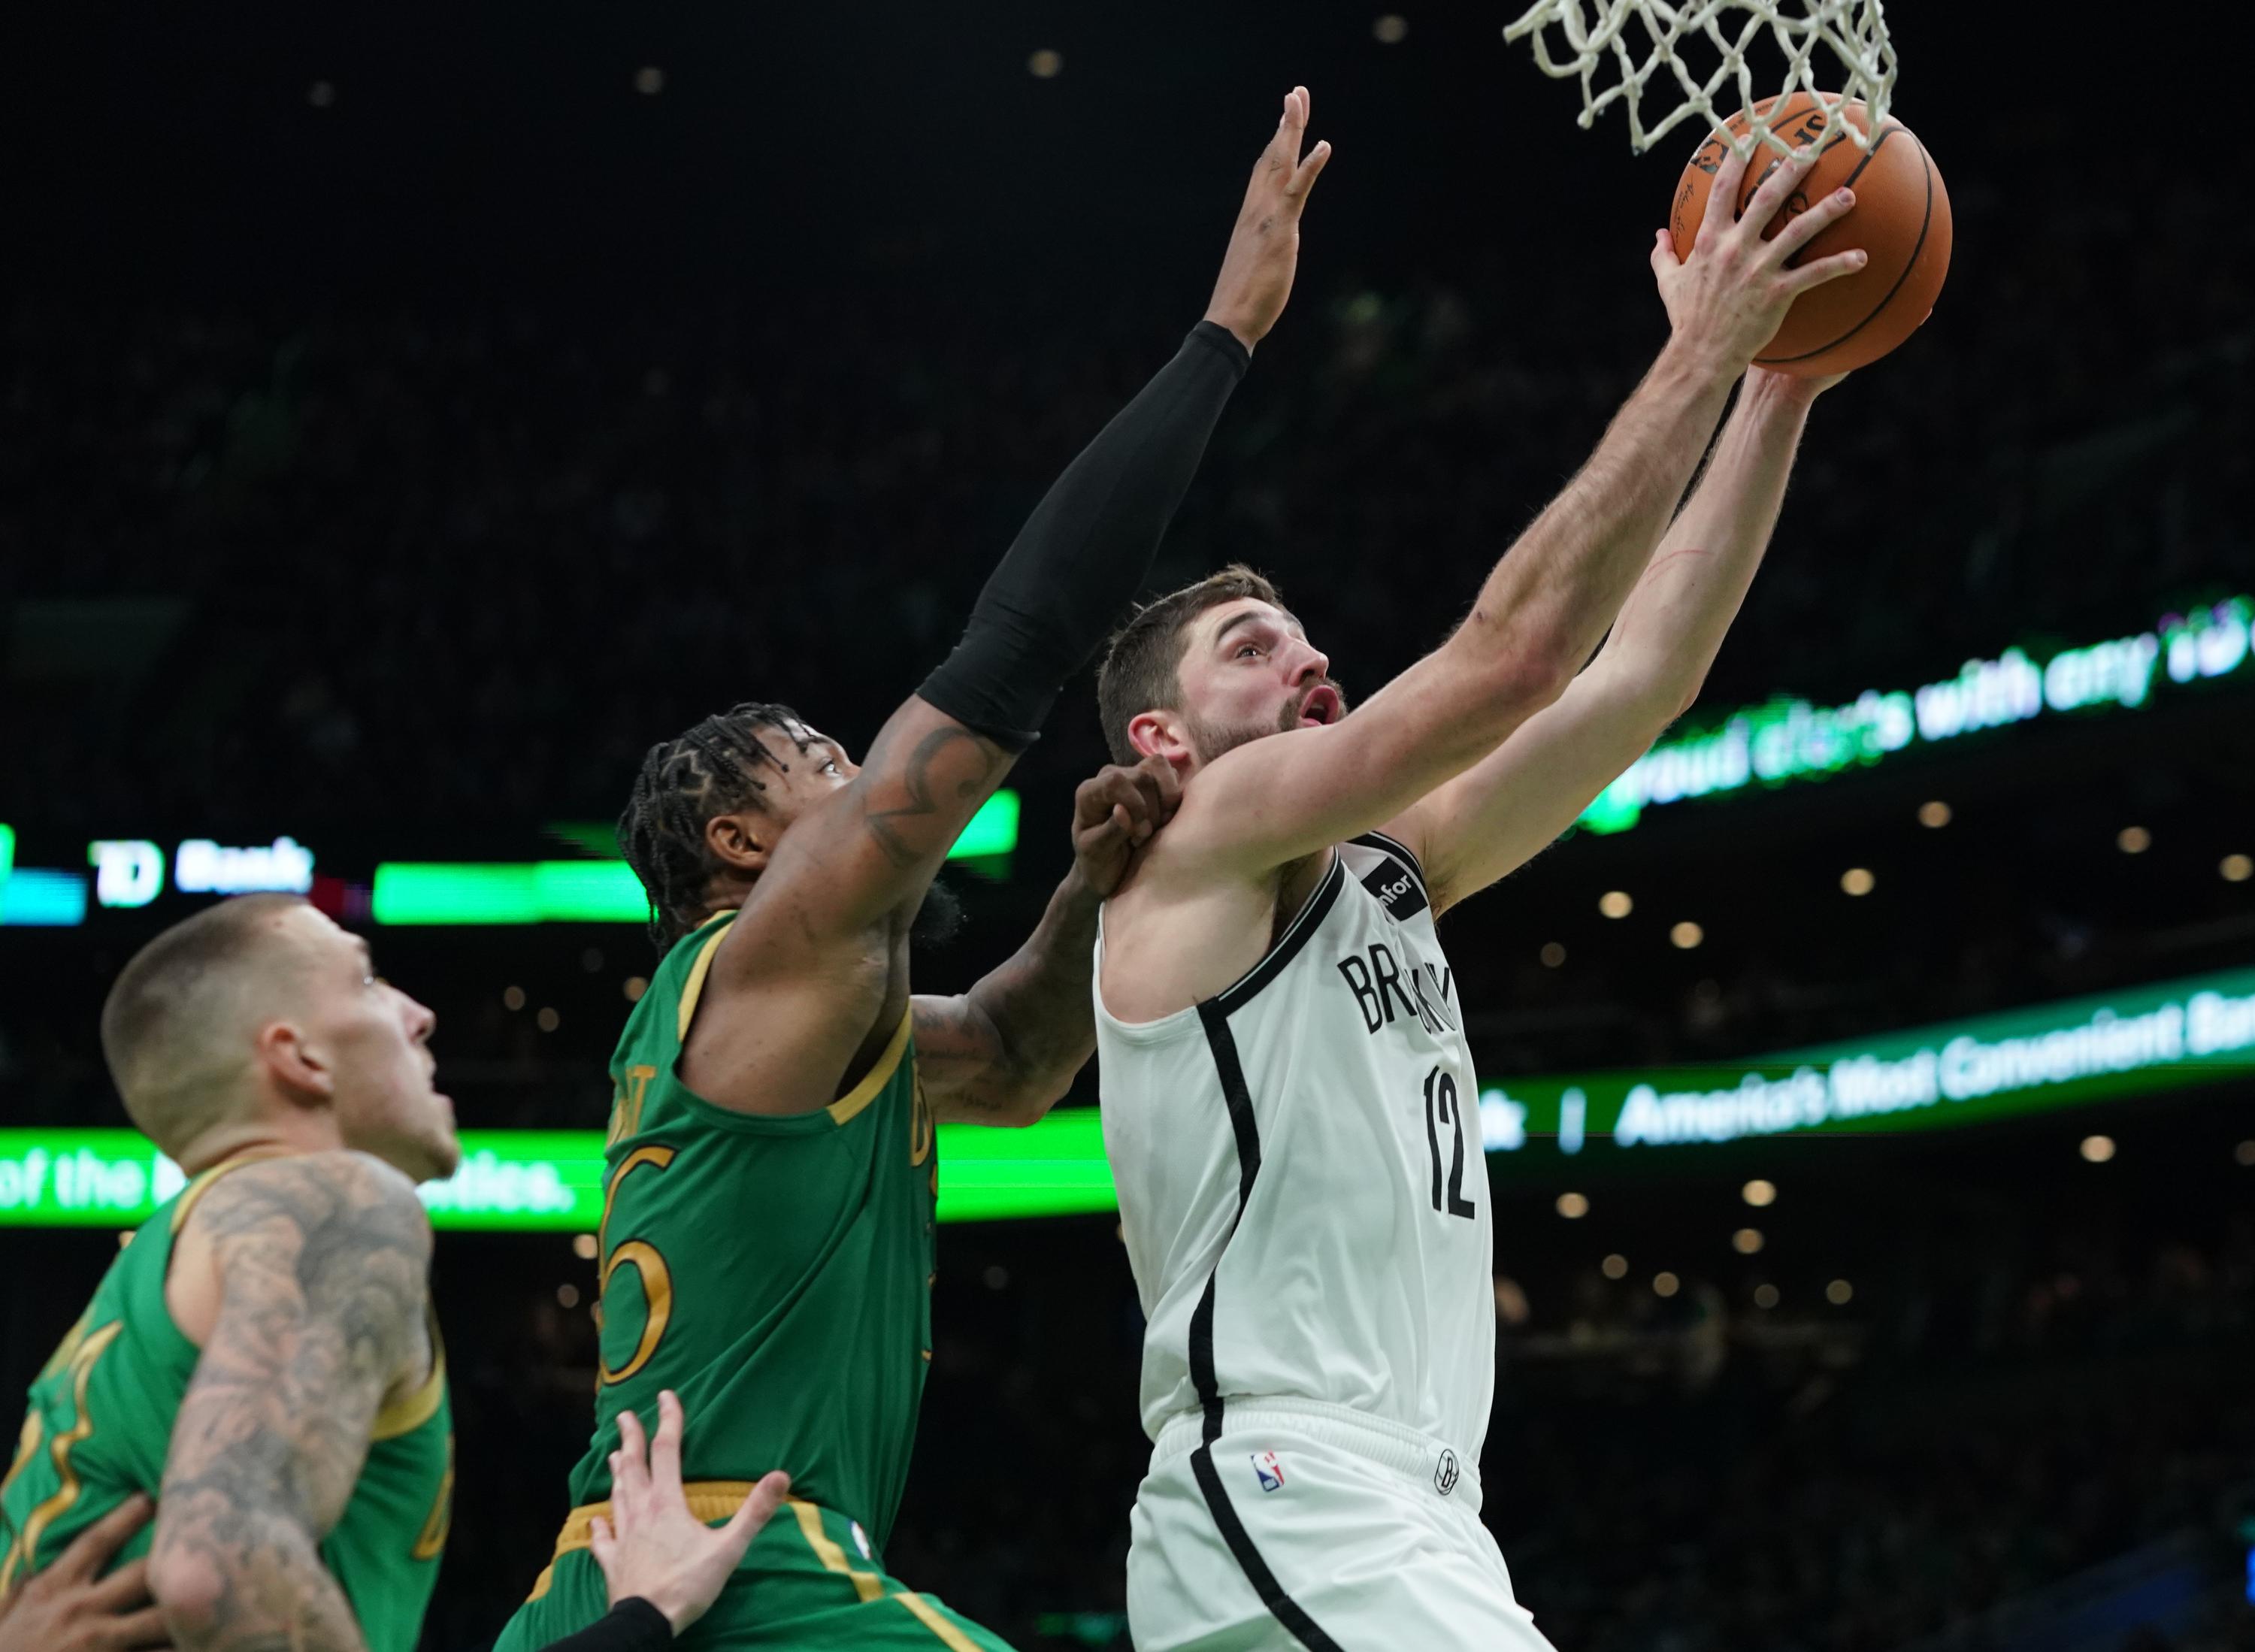 Nov 27, 2019; Boston, MA, USA; Brooklyn Nets guard Joe Harris (12) drives to the basket against Boston Celtics guard Marcus Smart (36) in the second half at TD Garden. Celtics defeated the Nets 121-110. Mandatory Credit: David Butler II-USA TODAY Sports / © David Butler II-USA TODAY Sports